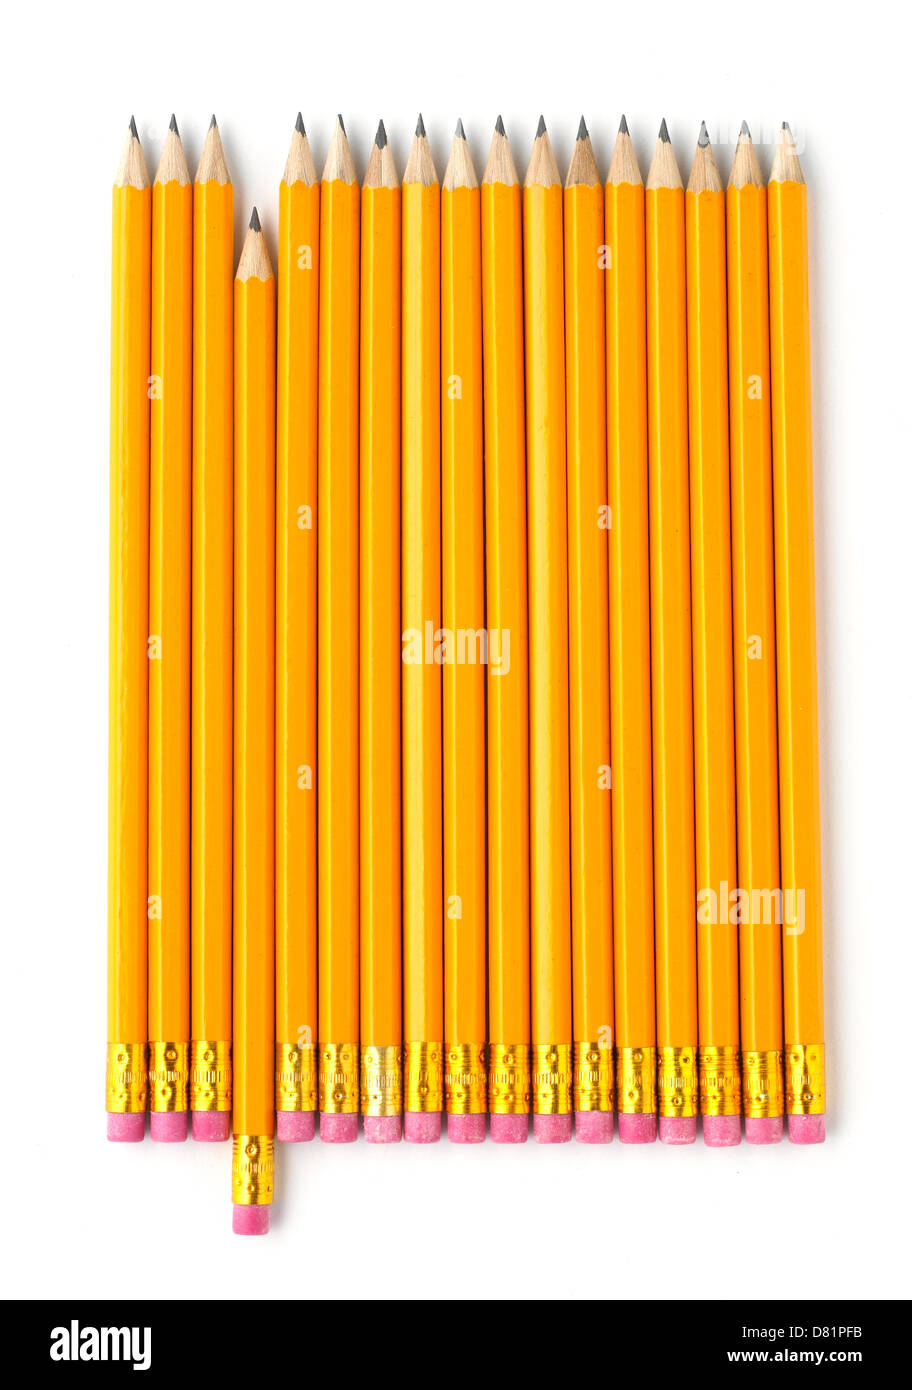 yellow pencils cut out onto a white background Stock Photo